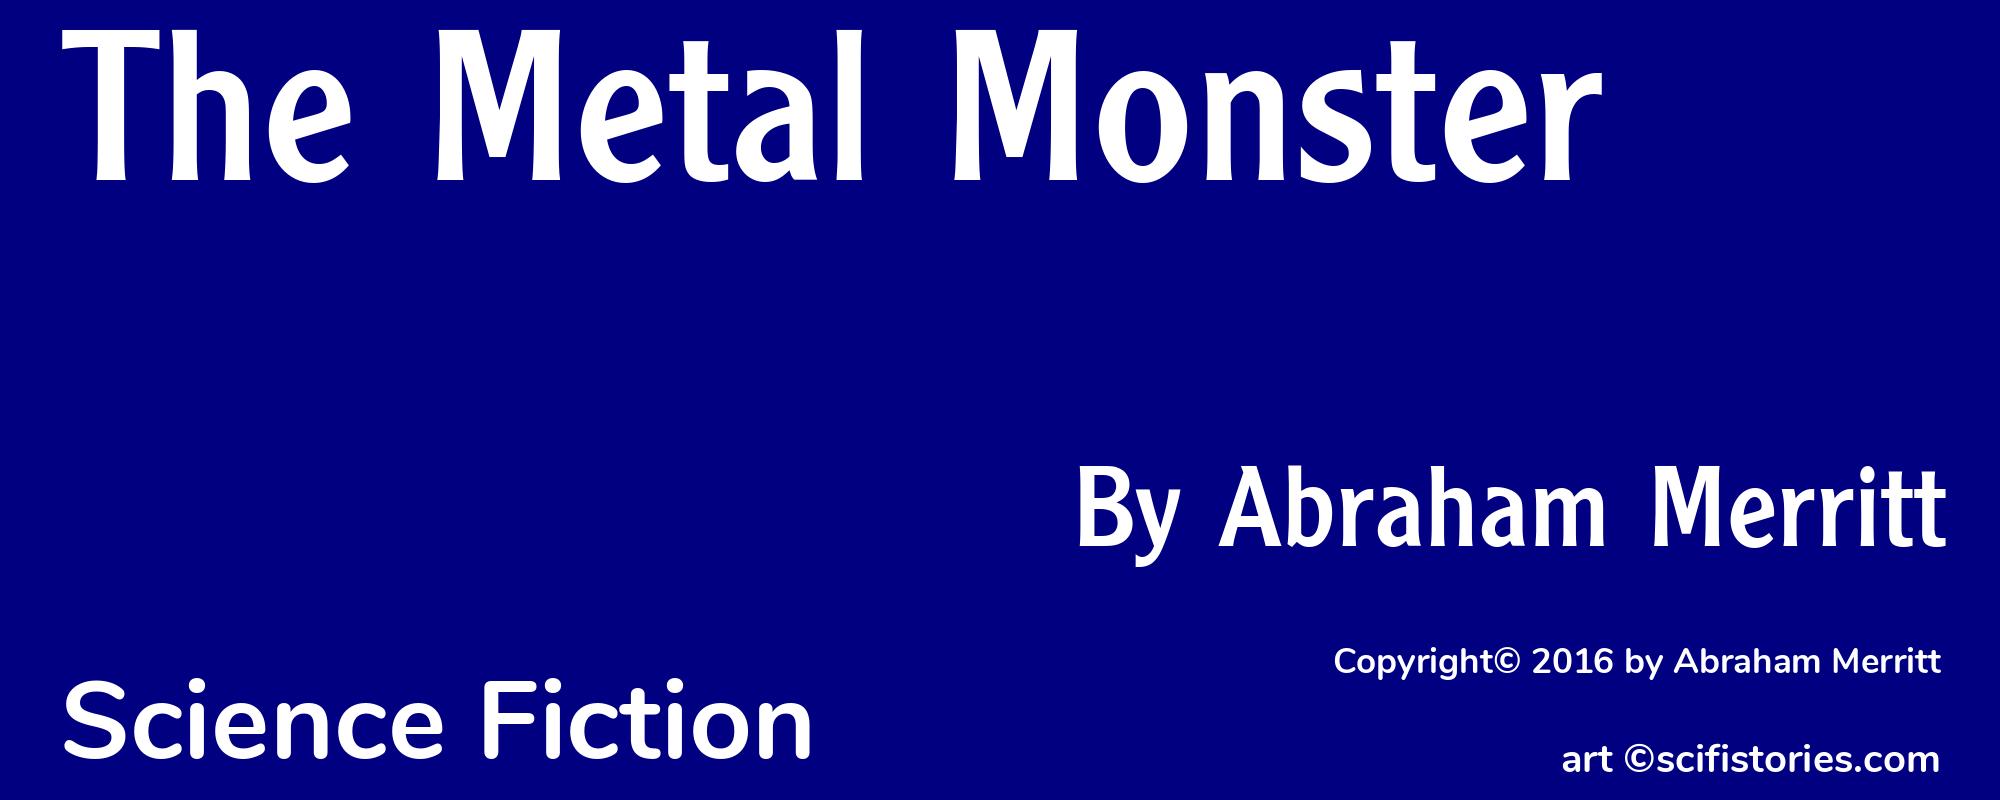 The Metal Monster - Cover